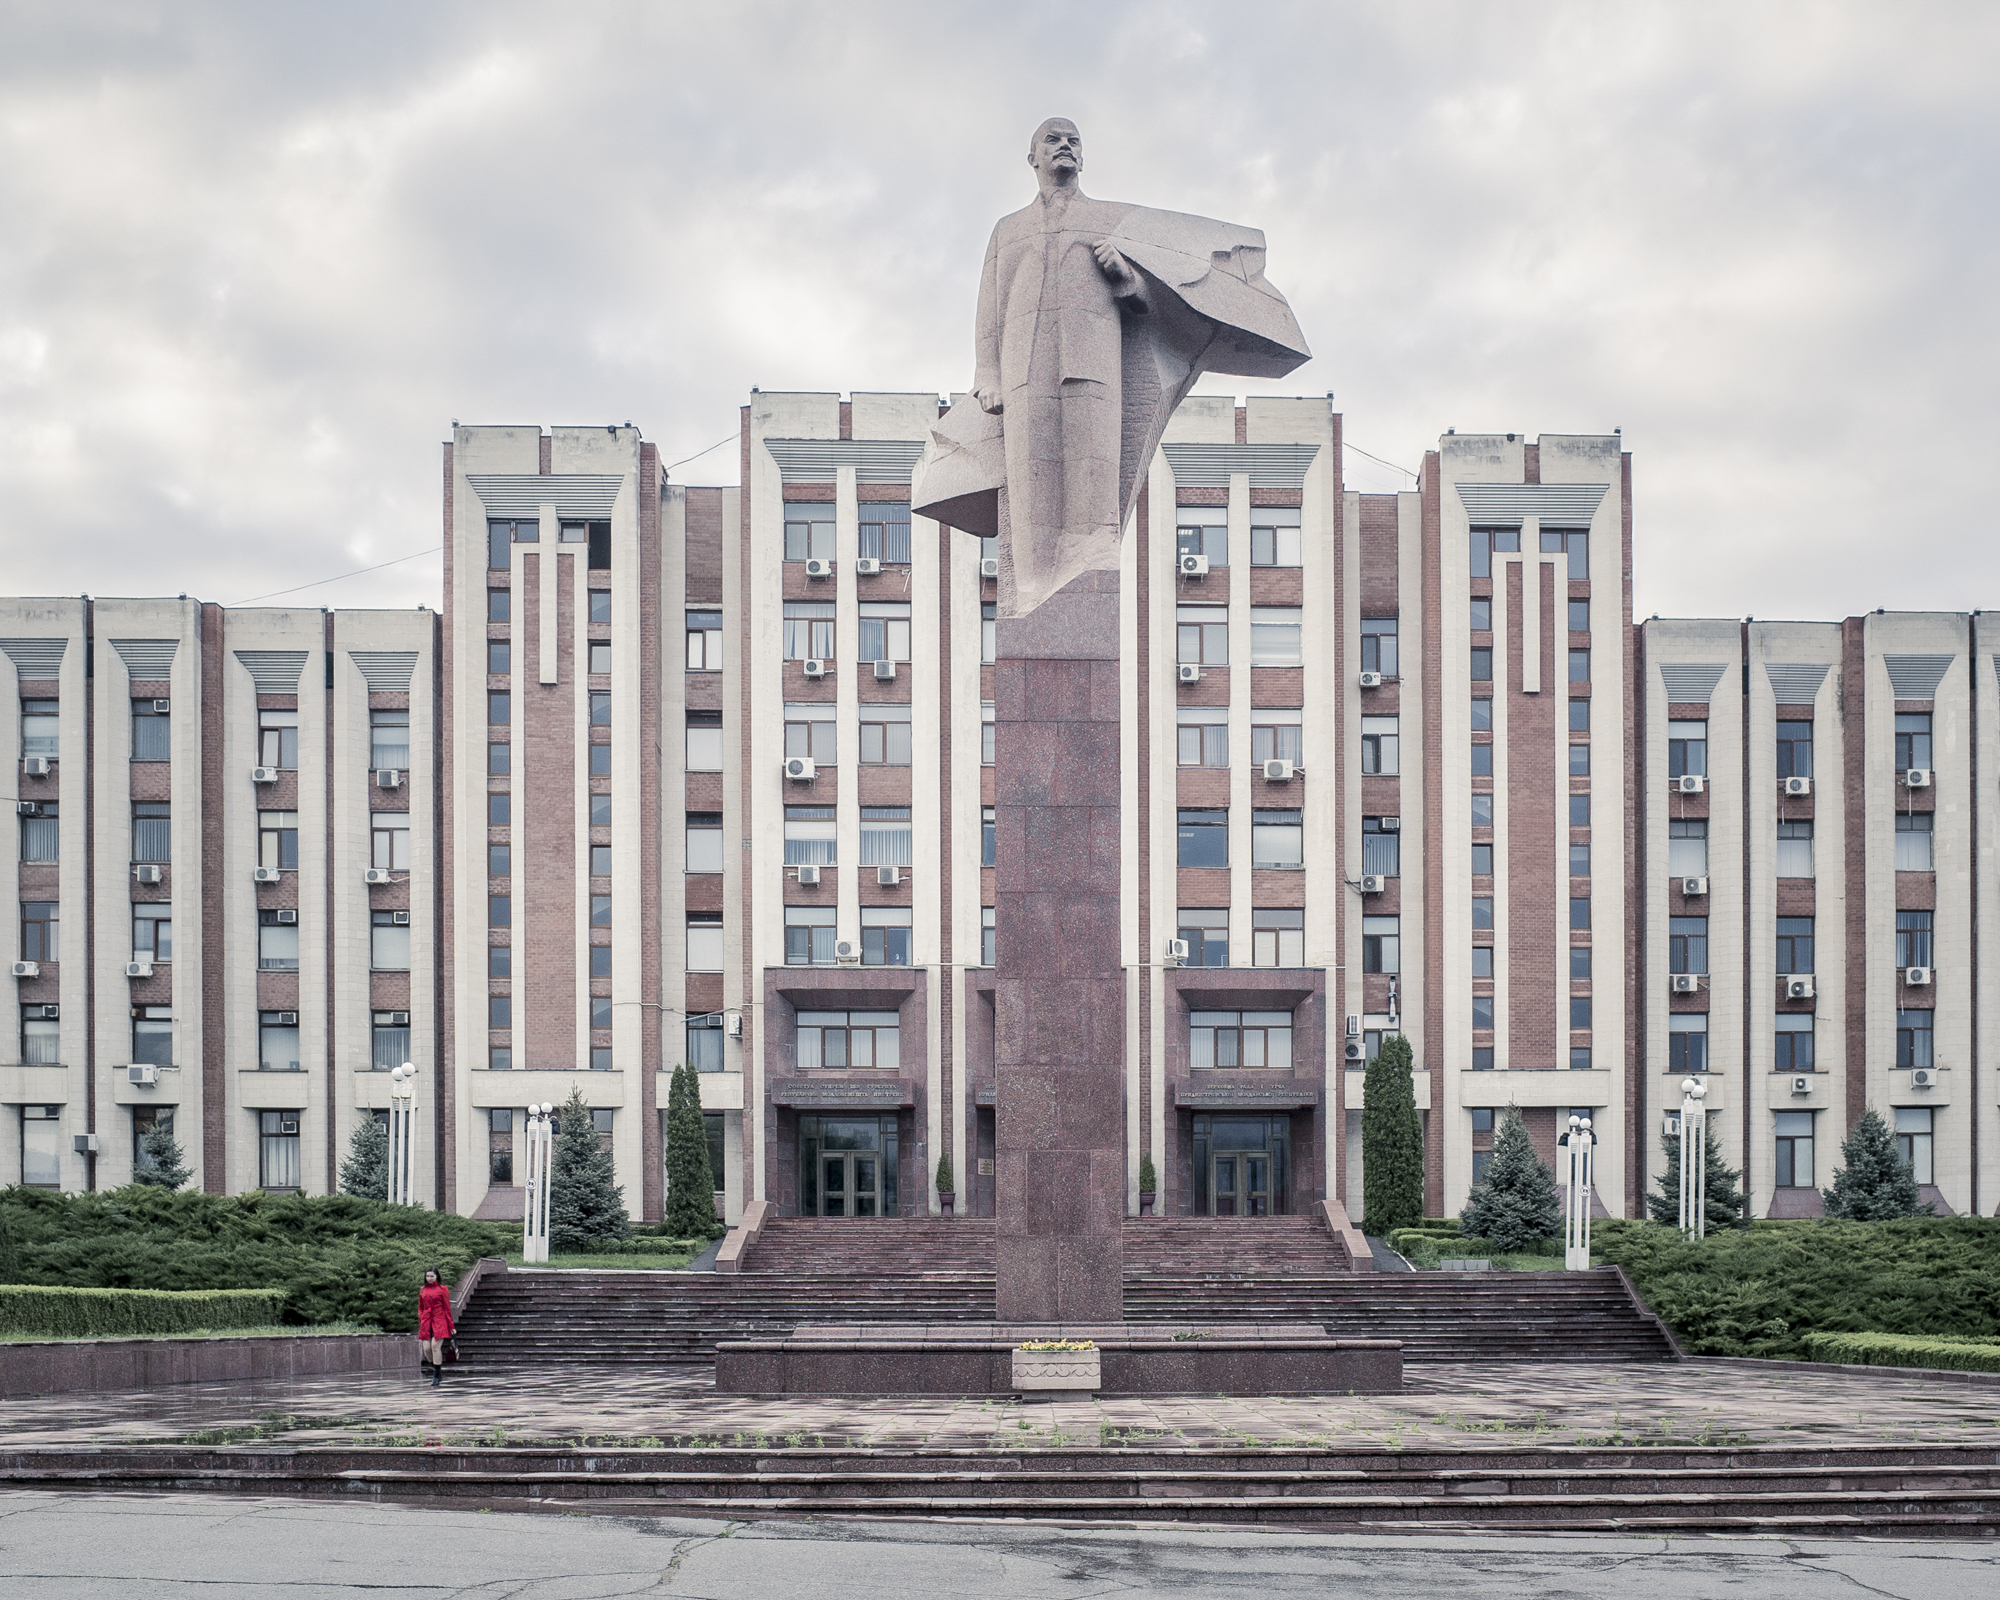   "DE FACTO" TRANSNISTRIA | 2015   The self-proclaimed Republic of Pridnestrovia (better known as Transnistria) celebrates the 25th anniversary of its declaration of independence. This small territory located mostly between the Dniester River and the